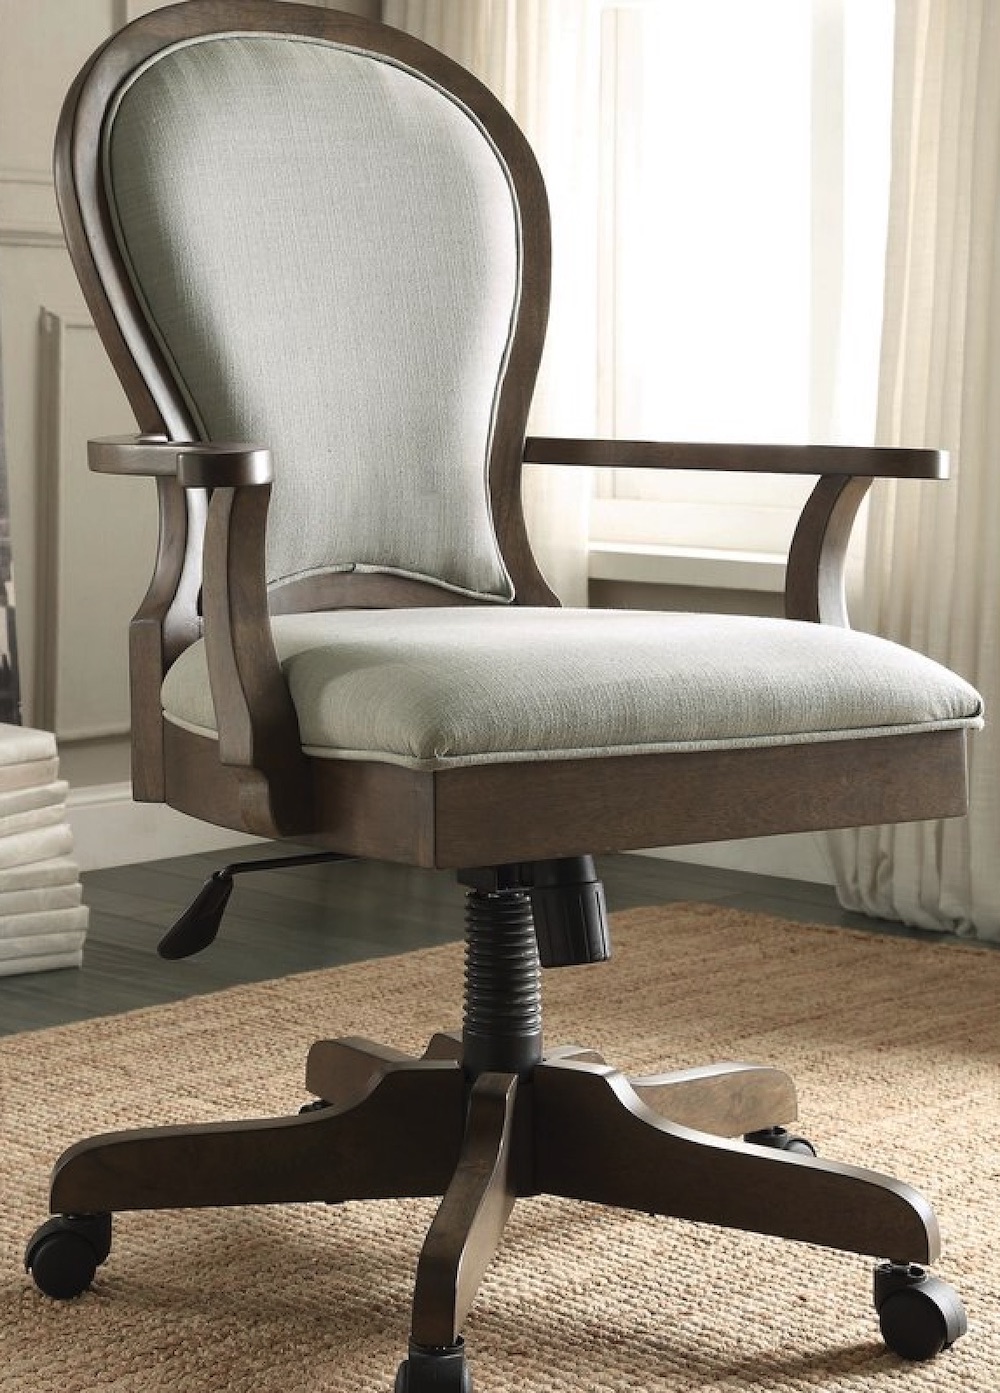 Chairs for Your Workspace Mellette Task Chair #DeskChairs #HomeOffice #HomeOfficeDeskChairs #OfficeChairs #Decor #FarmhouseDecor #WorkingMoms #WorkFromHome